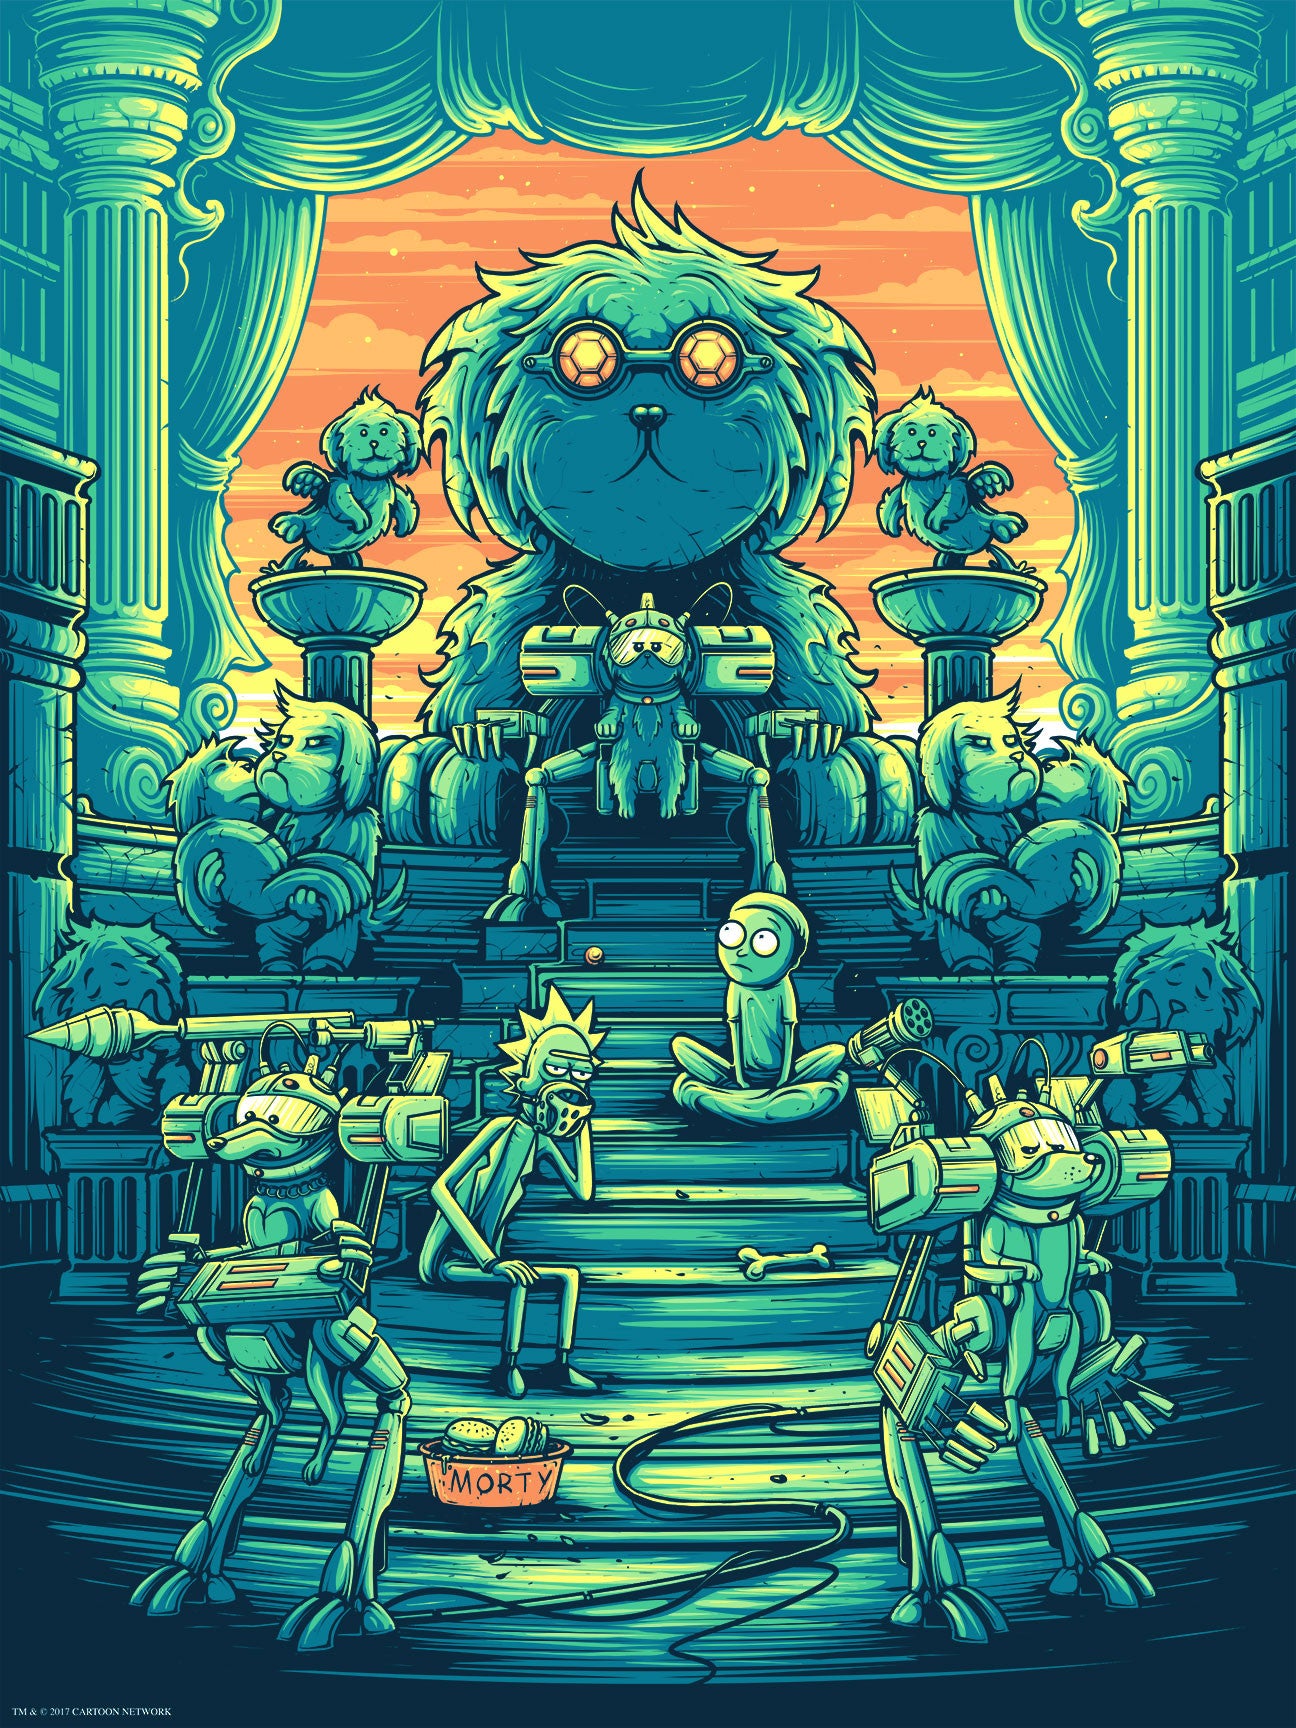 Dan Mumford "You shall now call me Snowball, because my fur is pretty and white" Orange Sky Variant